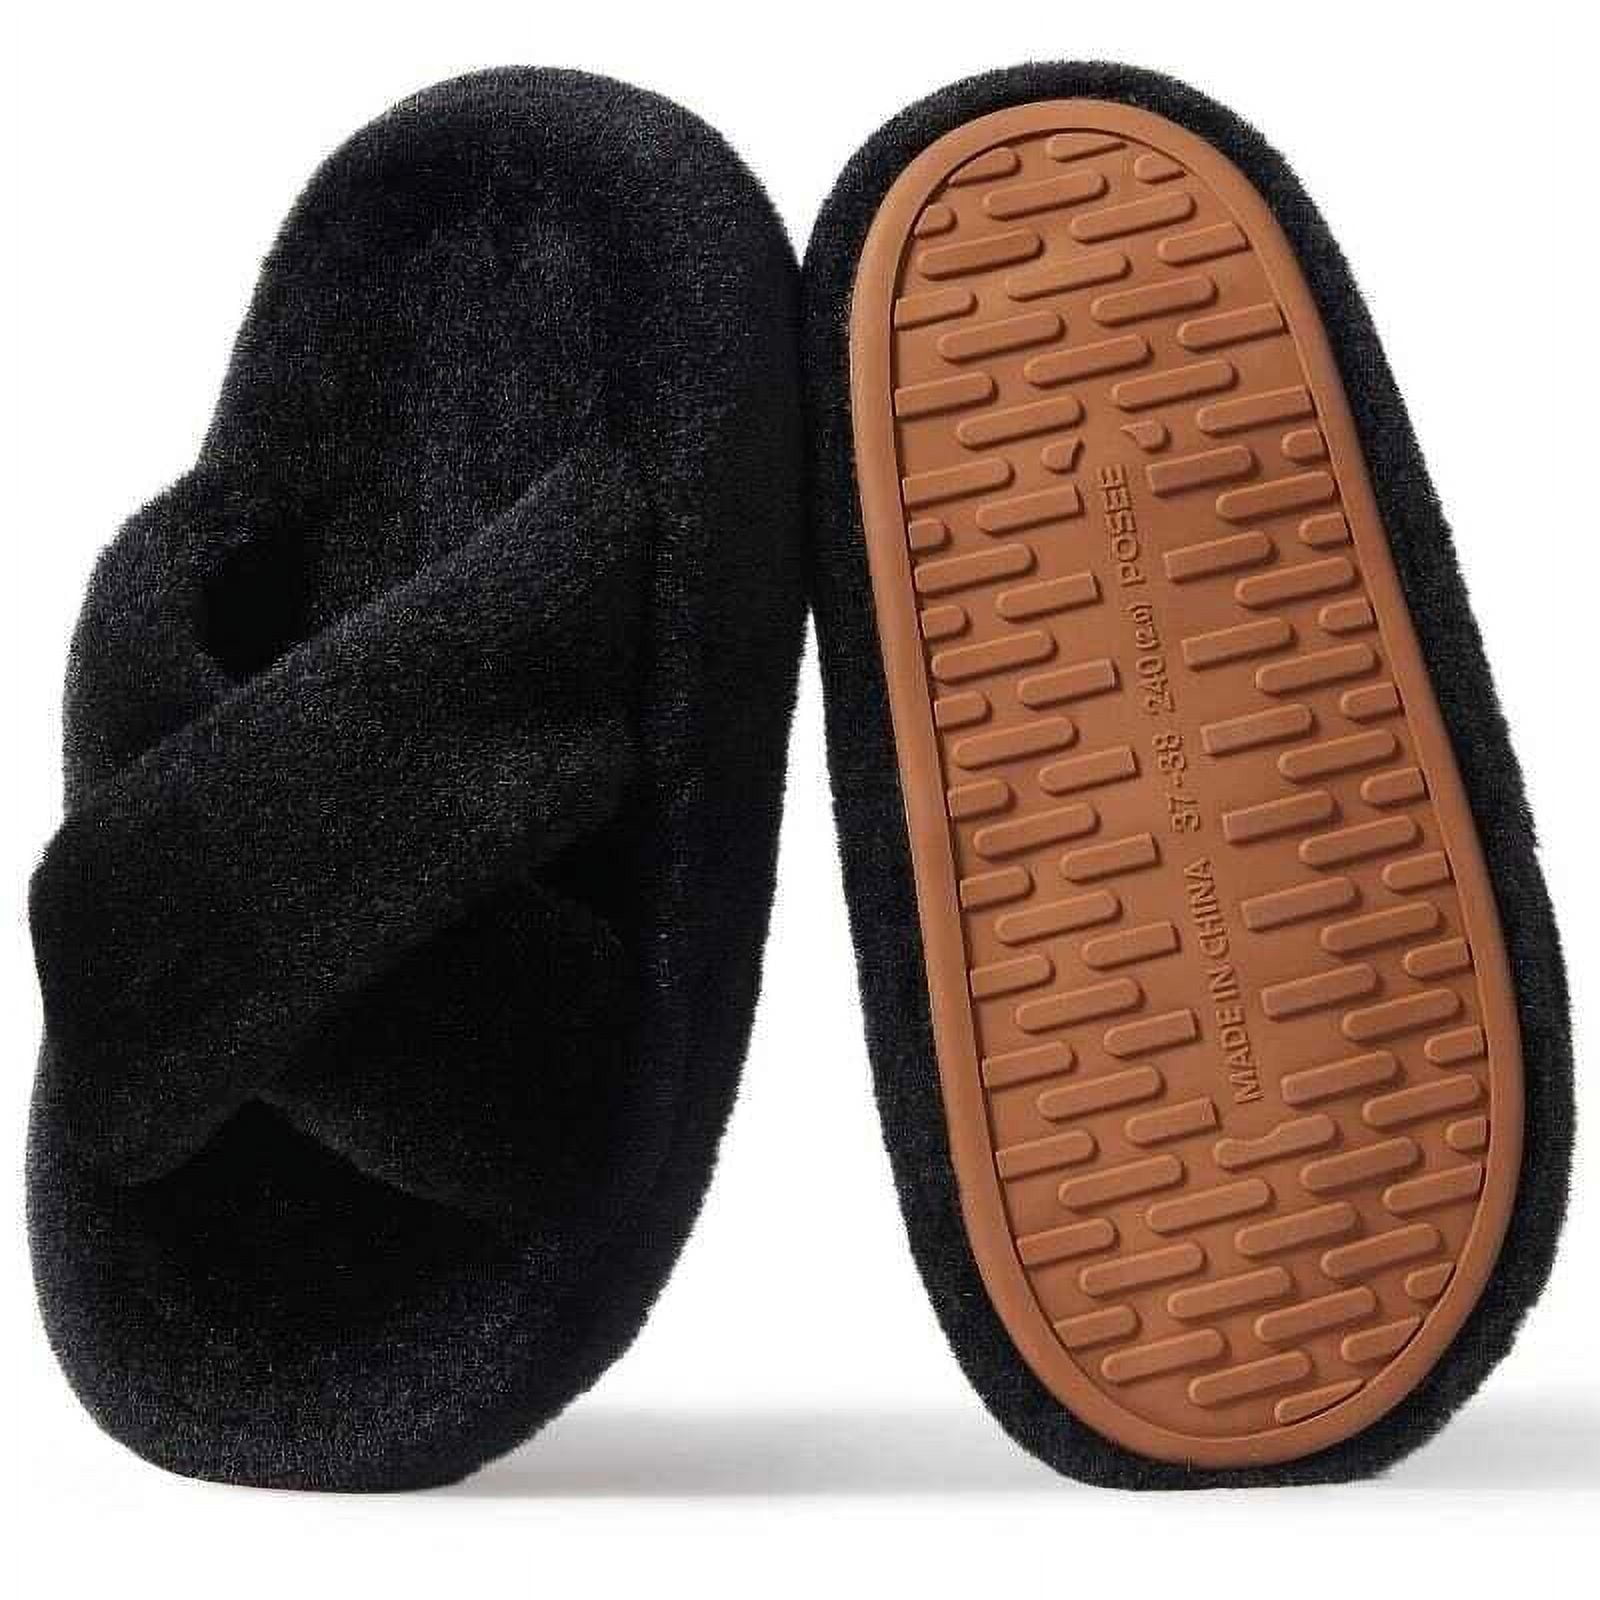 POSEE Fuzzy Slippers for Women Cross Band House Shoes Bedroom Indoor ...